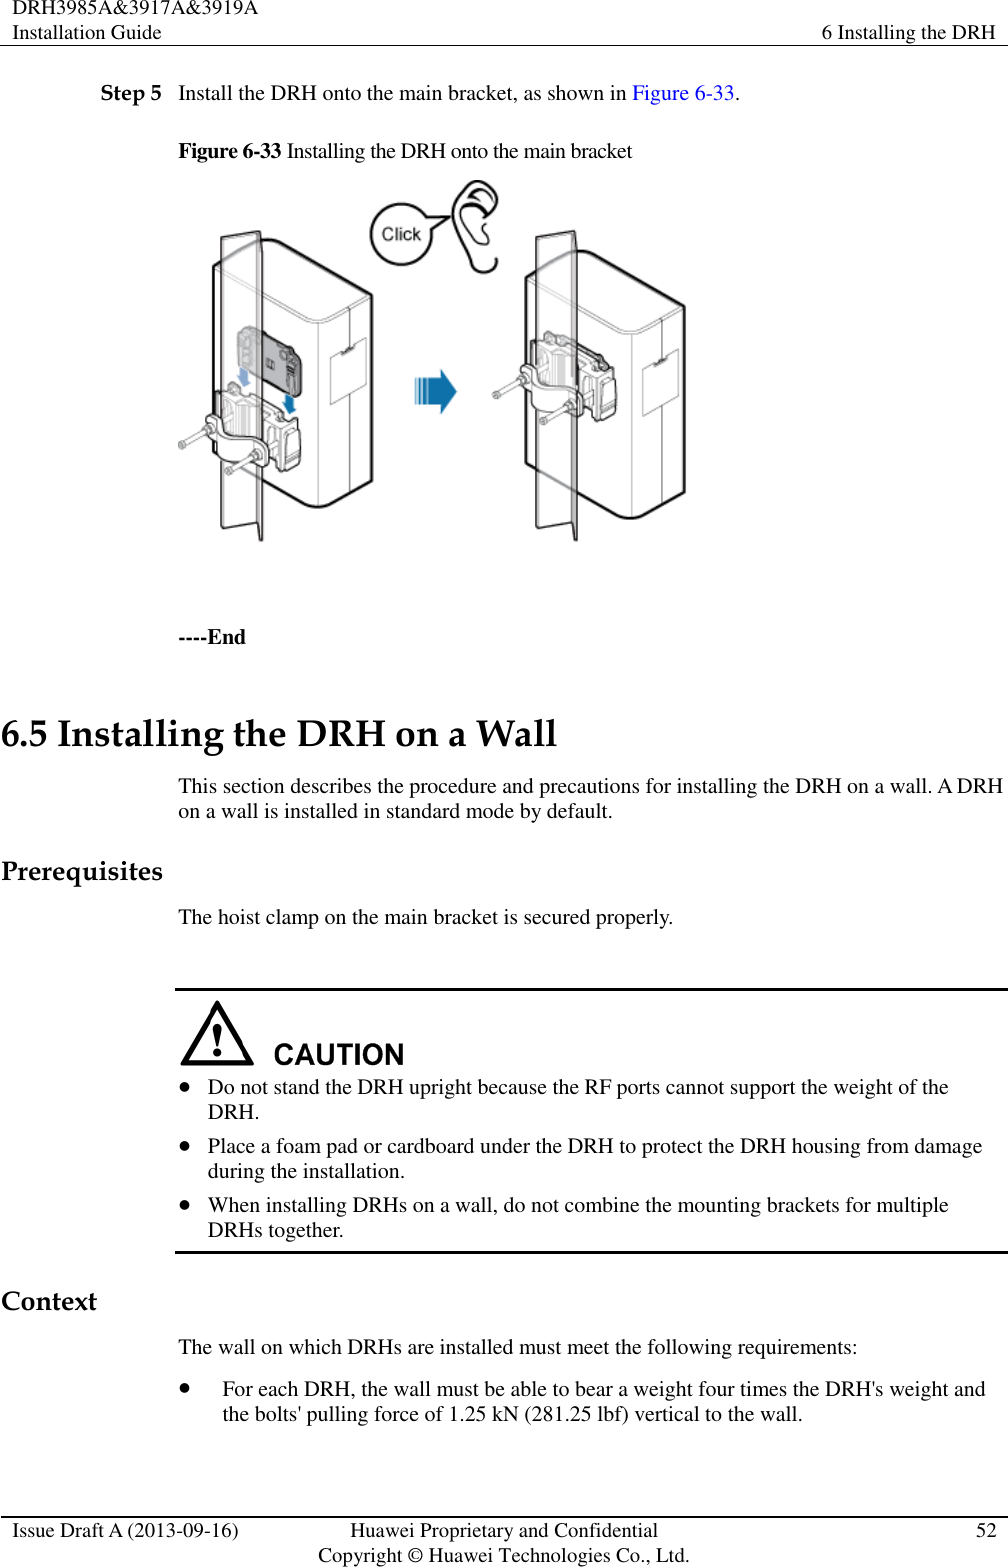 DRH3985A&amp;3917A&amp;3919A Installation Guide 6 Installing the DRH  Issue Draft A (2013-09-16) Huawei Proprietary and Confidential                                     Copyright © Huawei Technologies Co., Ltd. 52  Step 5 Install the DRH onto the main bracket, as shown in Figure 6-33. Figure 6-33 Installing the DRH onto the main bracket   ----End 6.5 Installing the DRH on a Wall This section describes the procedure and precautions for installing the DRH on a wall. A DRH on a wall is installed in standard mode by default. Prerequisites The hoist clamp on the main bracket is secured properly.    Do not stand the DRH upright because the RF ports cannot support the weight of the DRH.  Place a foam pad or cardboard under the DRH to protect the DRH housing from damage during the installation.  When installing DRHs on a wall, do not combine the mounting brackets for multiple DRHs together. Context The wall on which DRHs are installed must meet the following requirements:  For each DRH, the wall must be able to bear a weight four times the DRH&apos;s weight and the bolts&apos; pulling force of 1.25 kN (281.25 lbf) vertical to the wall. 